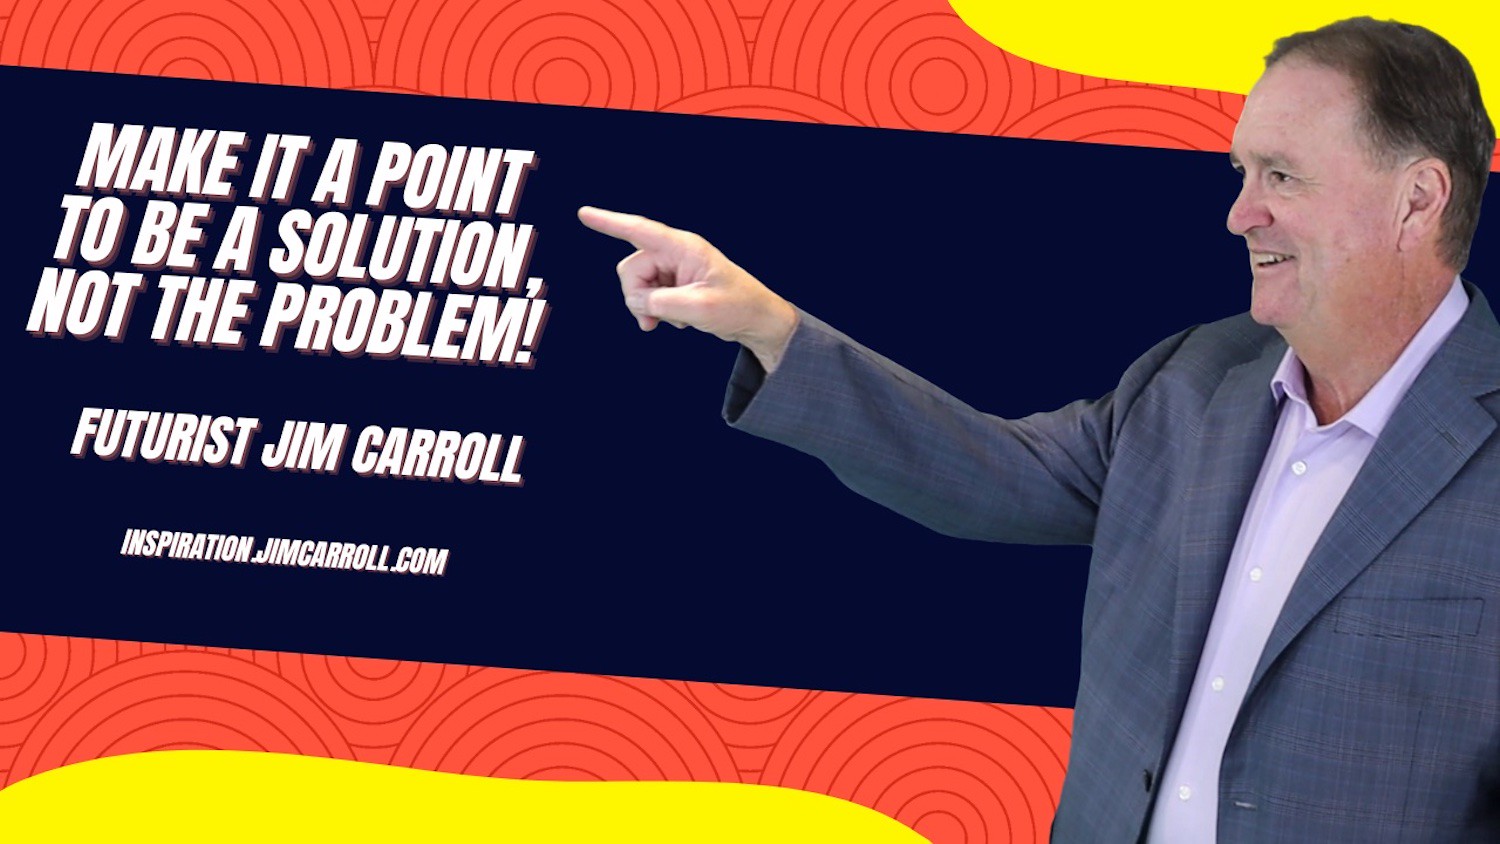 BeASol"Make it a point to be a solution, not the problem!" - Futurist Jim Carrollution